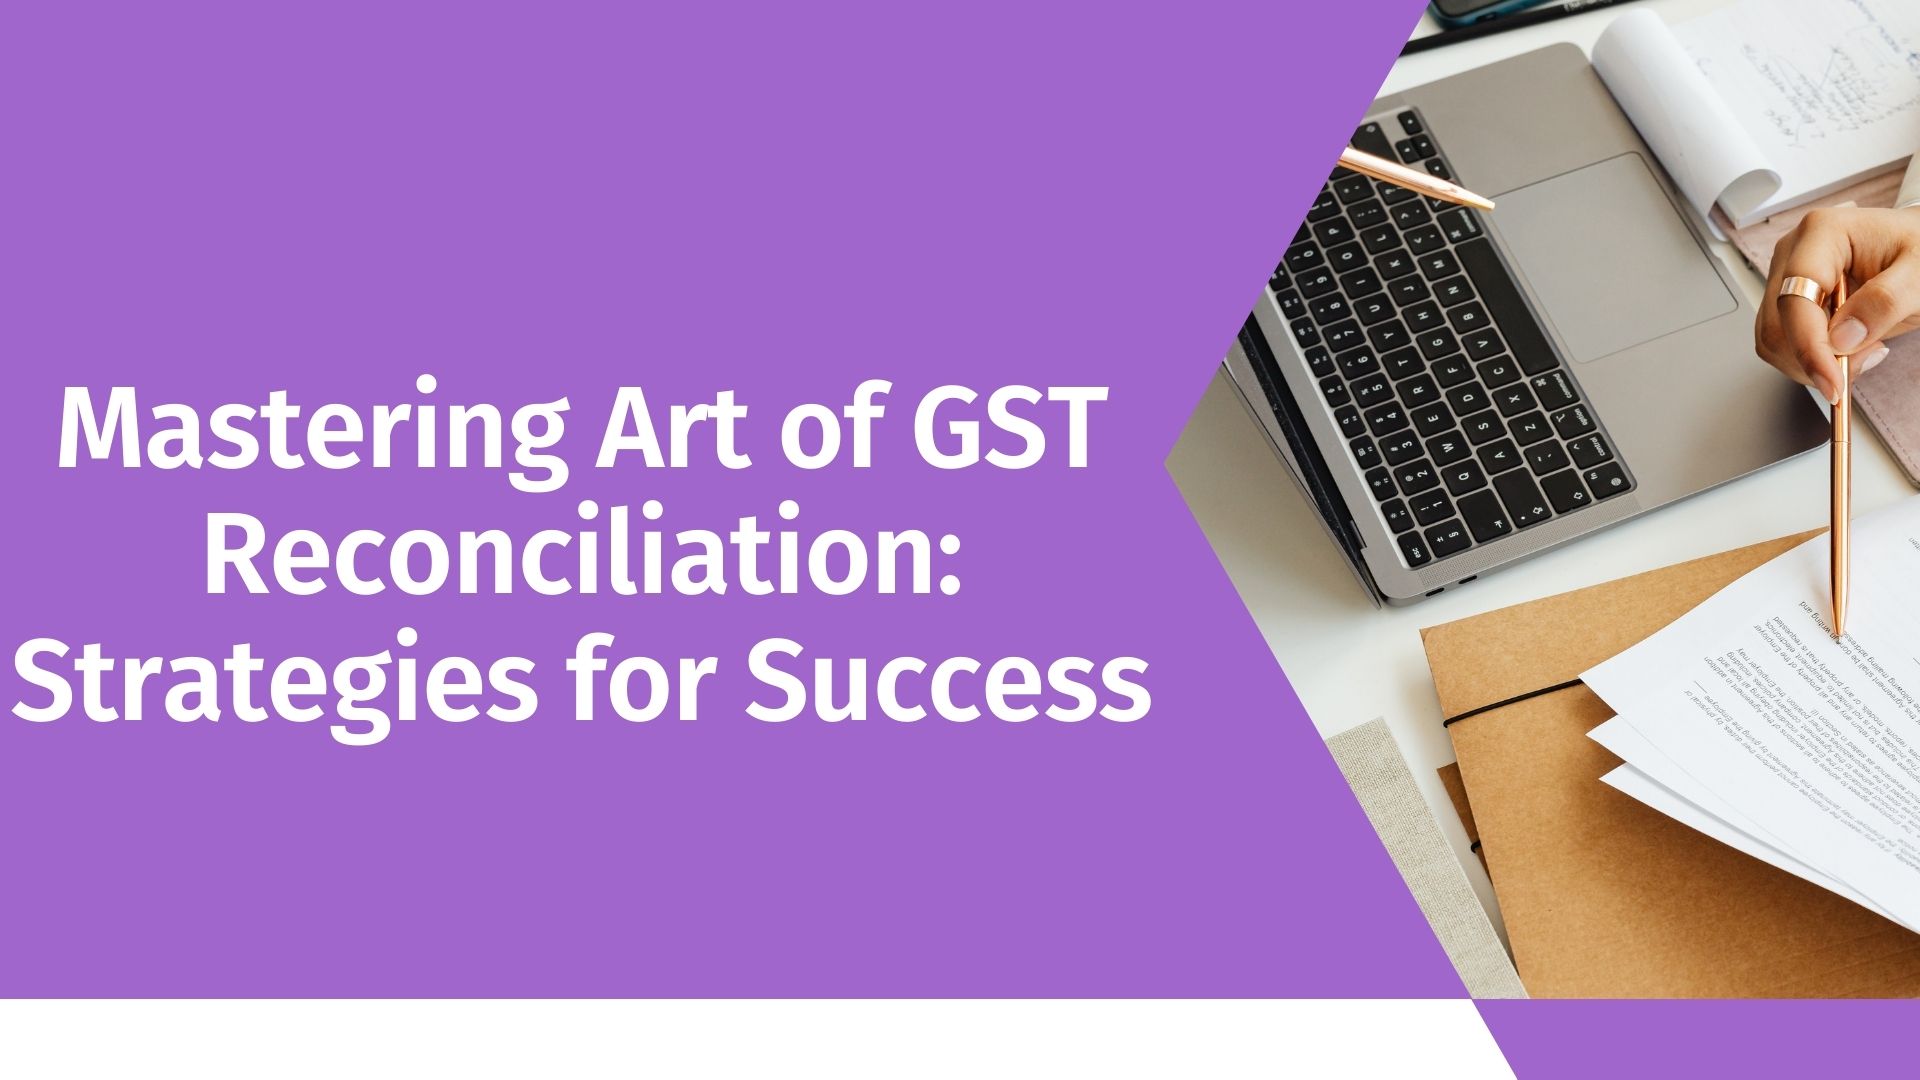 Mastering Art of GST Reconciliation: Strategies for Success